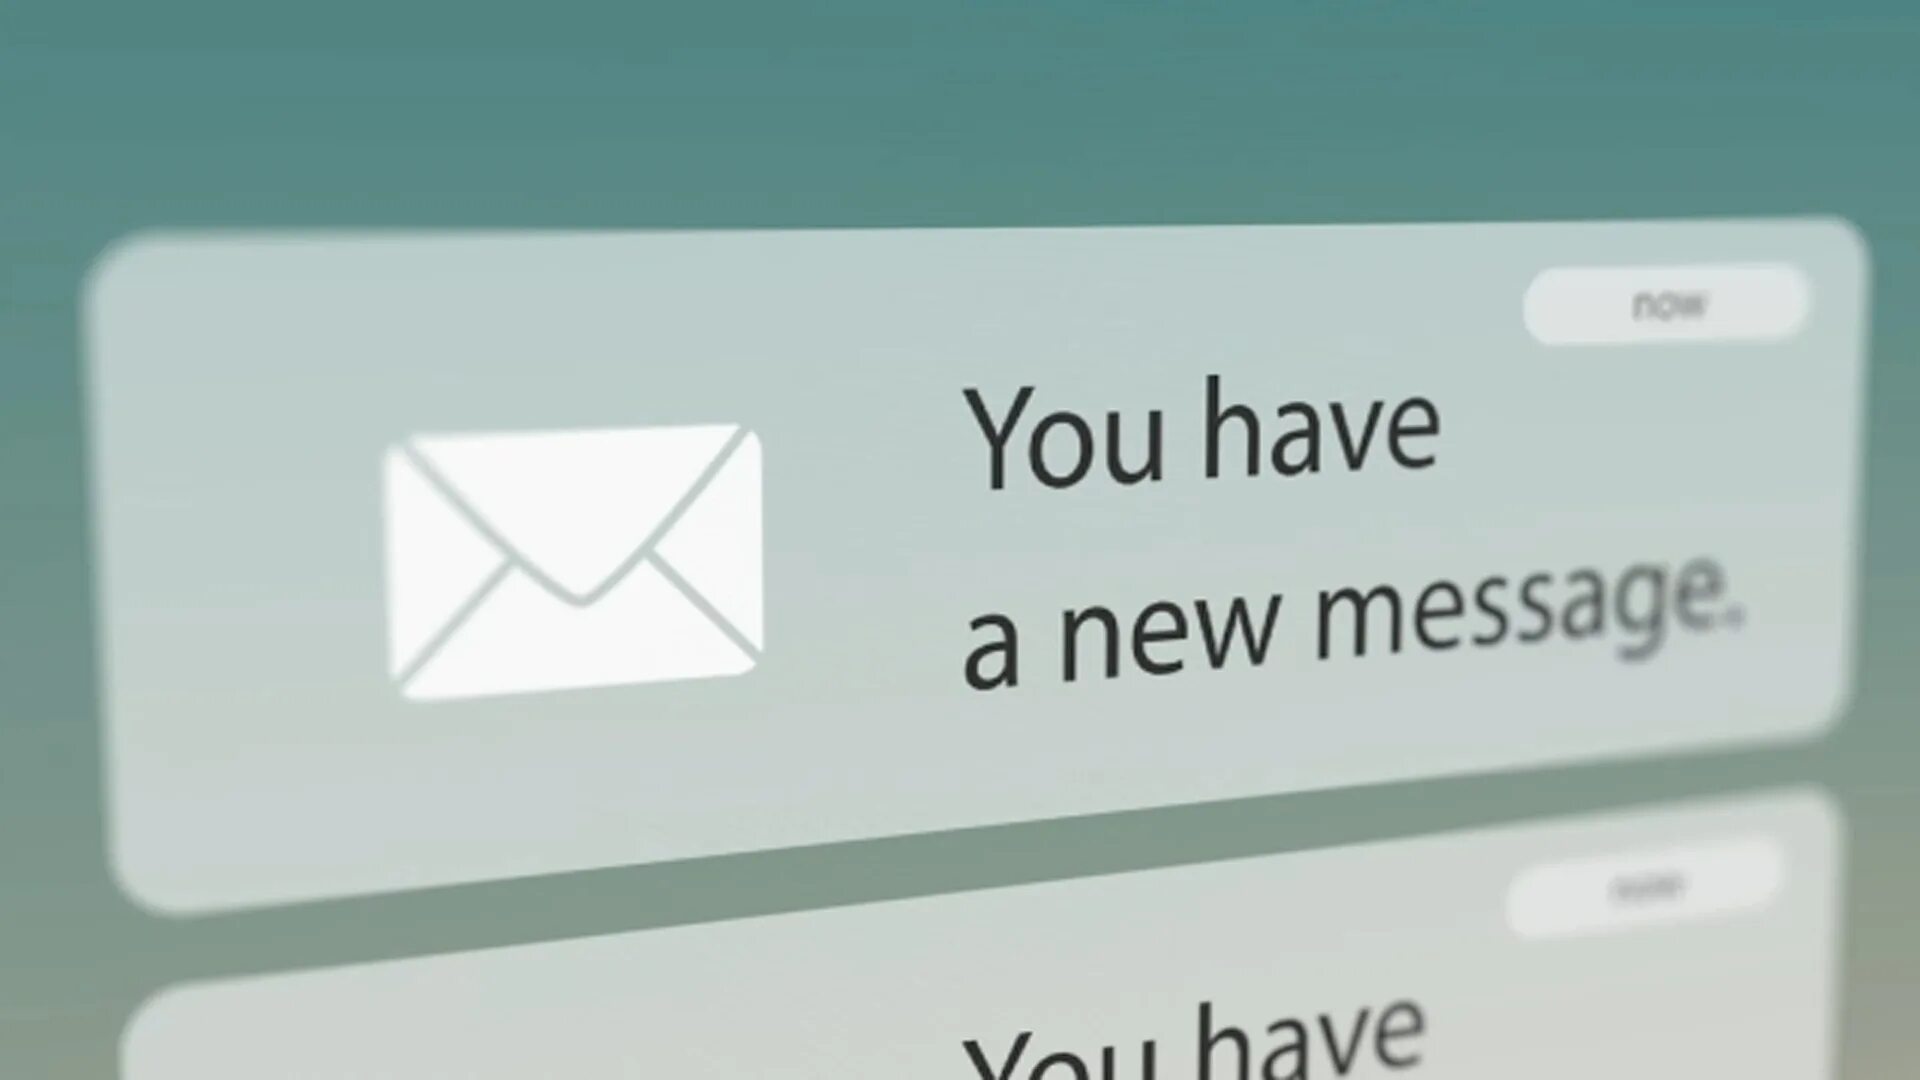 1 new message. New message. Notification message. New message icon.